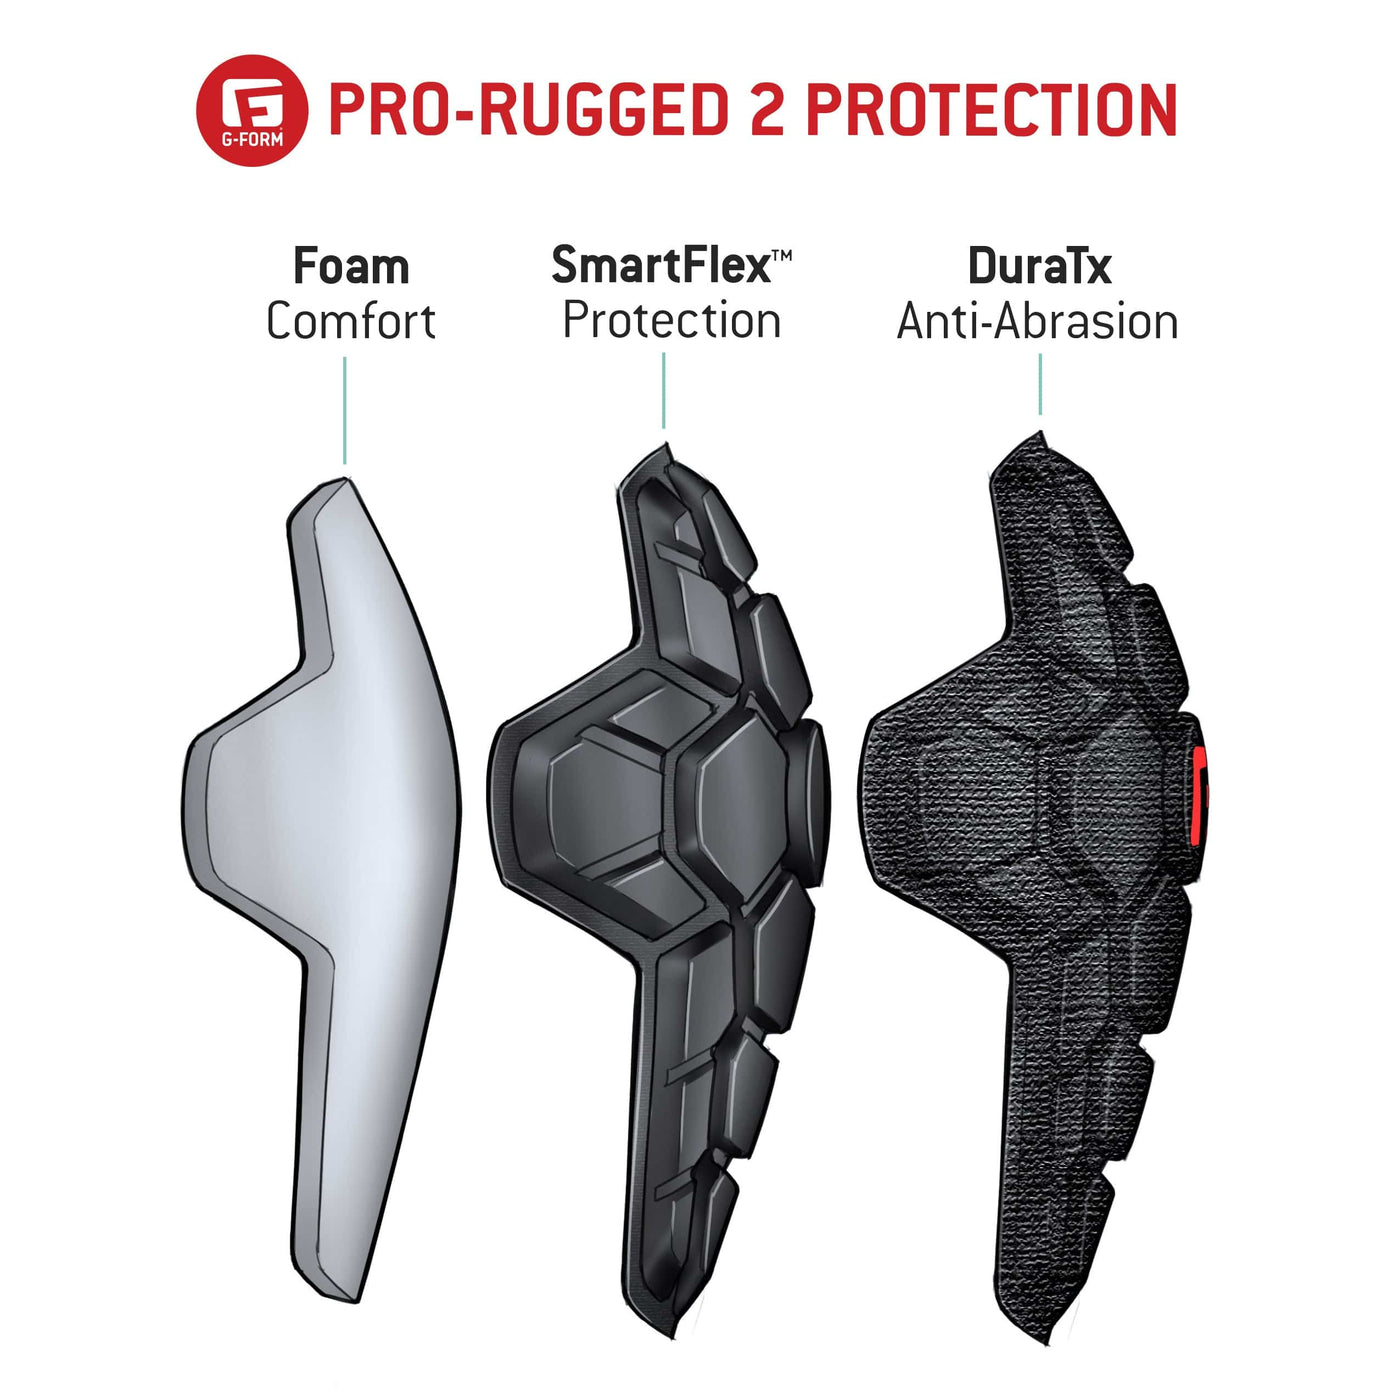 pro-rugged 2 protection